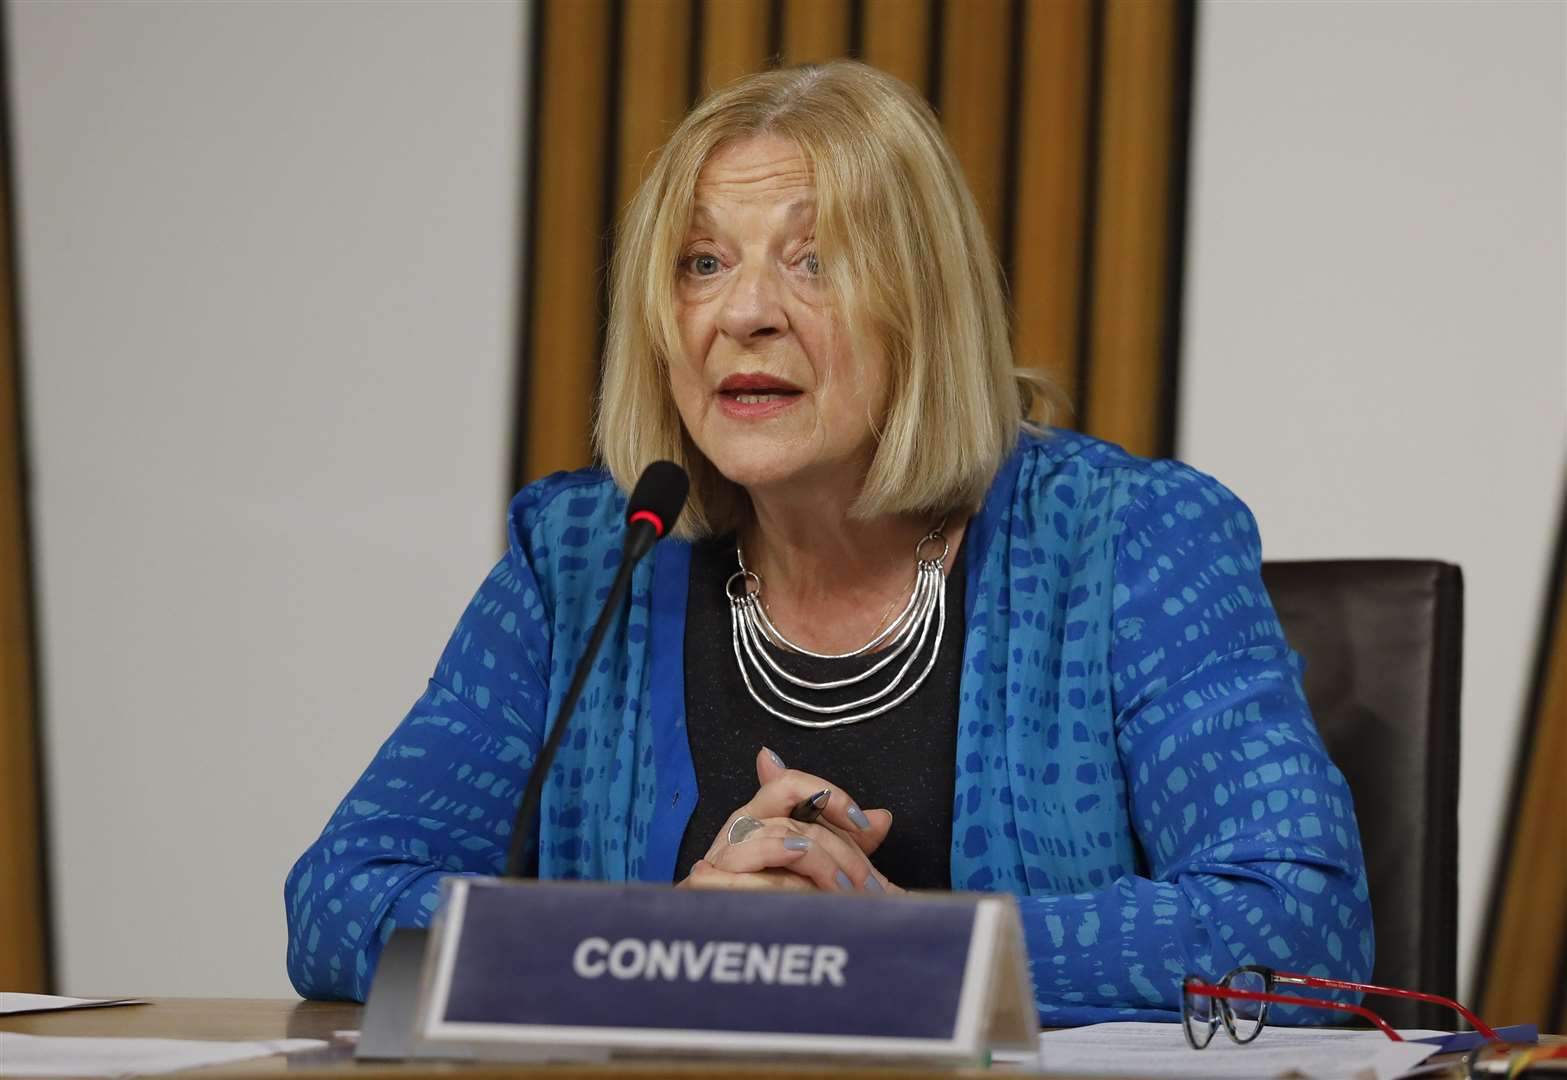 Convener Linda Fabiani offered an apology if women who came forward with complaints felt exploited by the inquiry (Andrew Cowan/Scottish Parliament/PA)